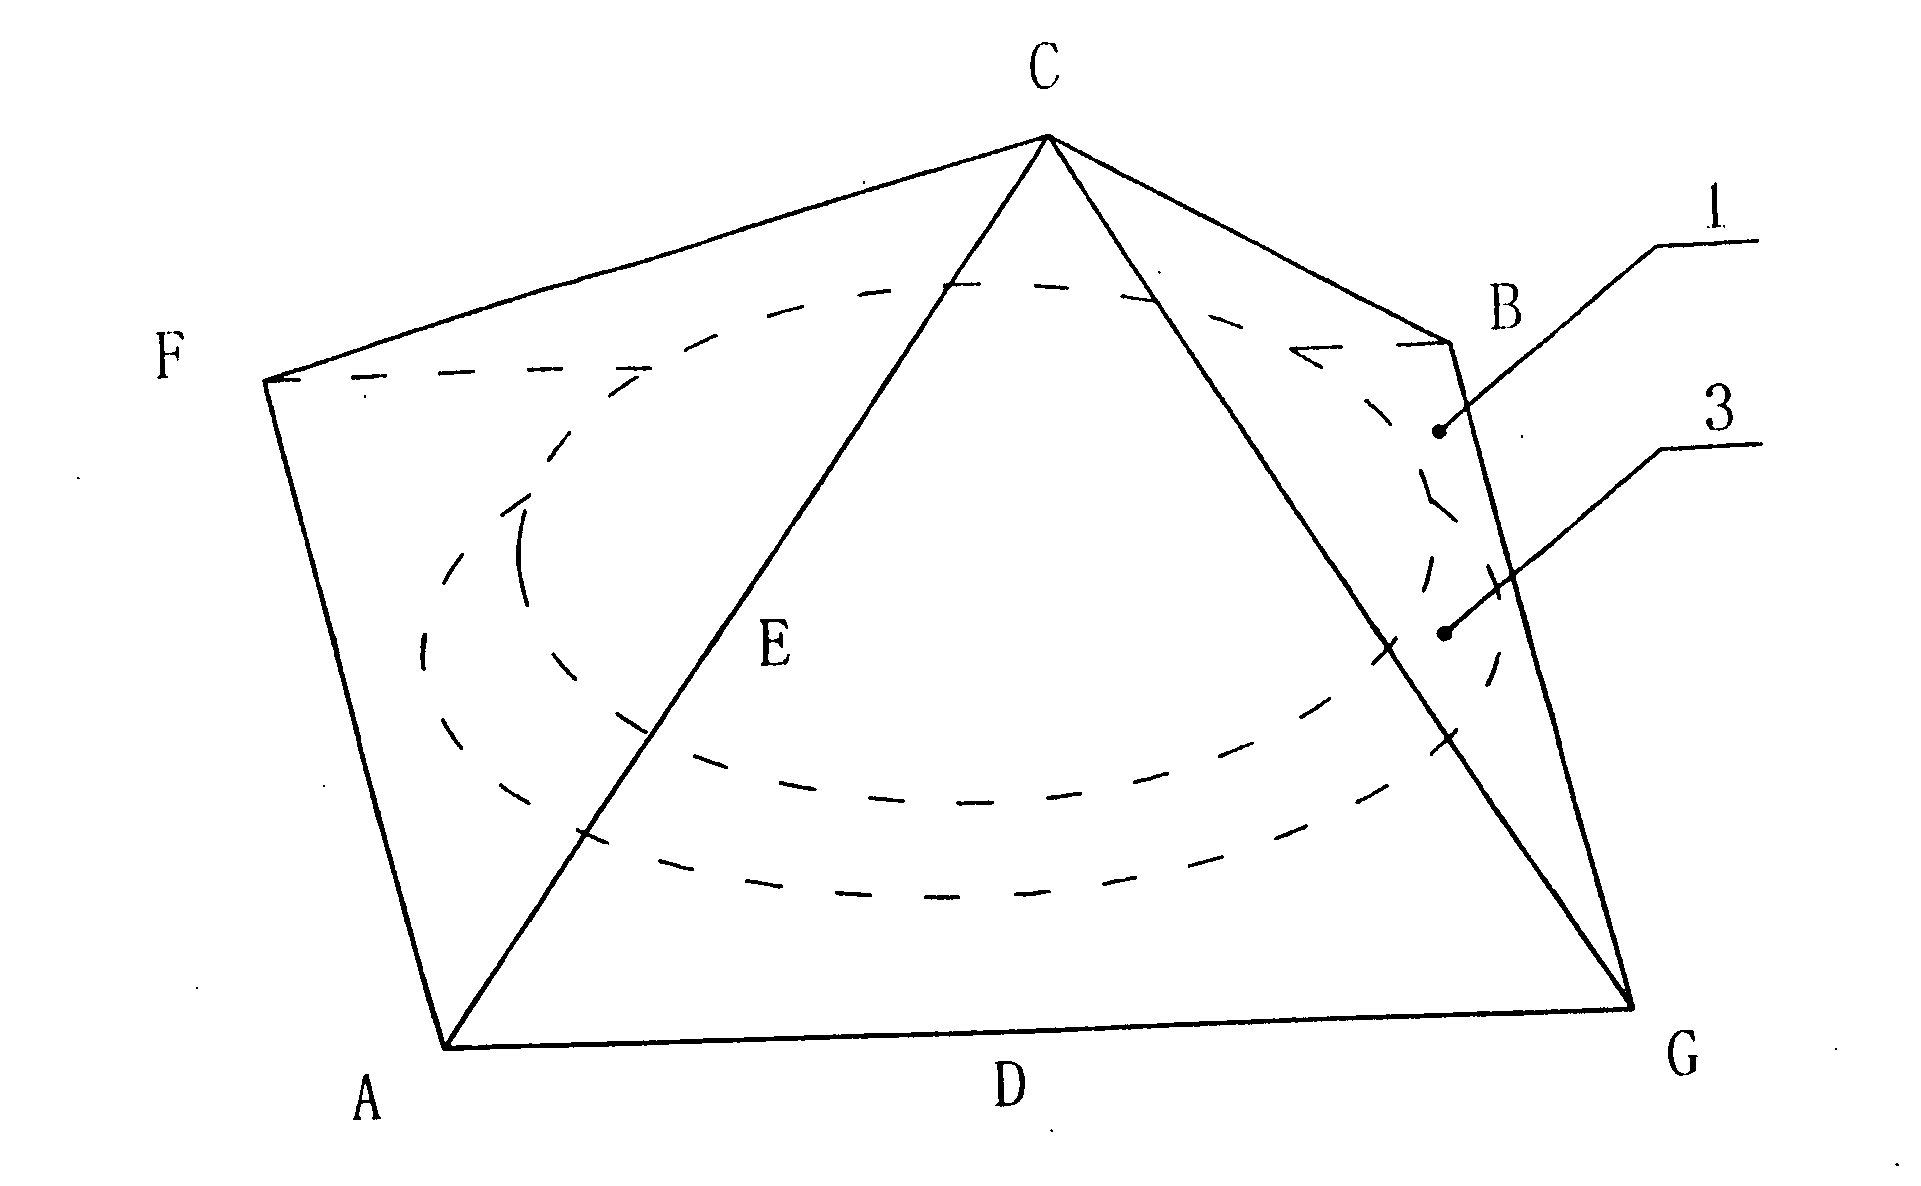 Pyramid cap with intensity magnetic field